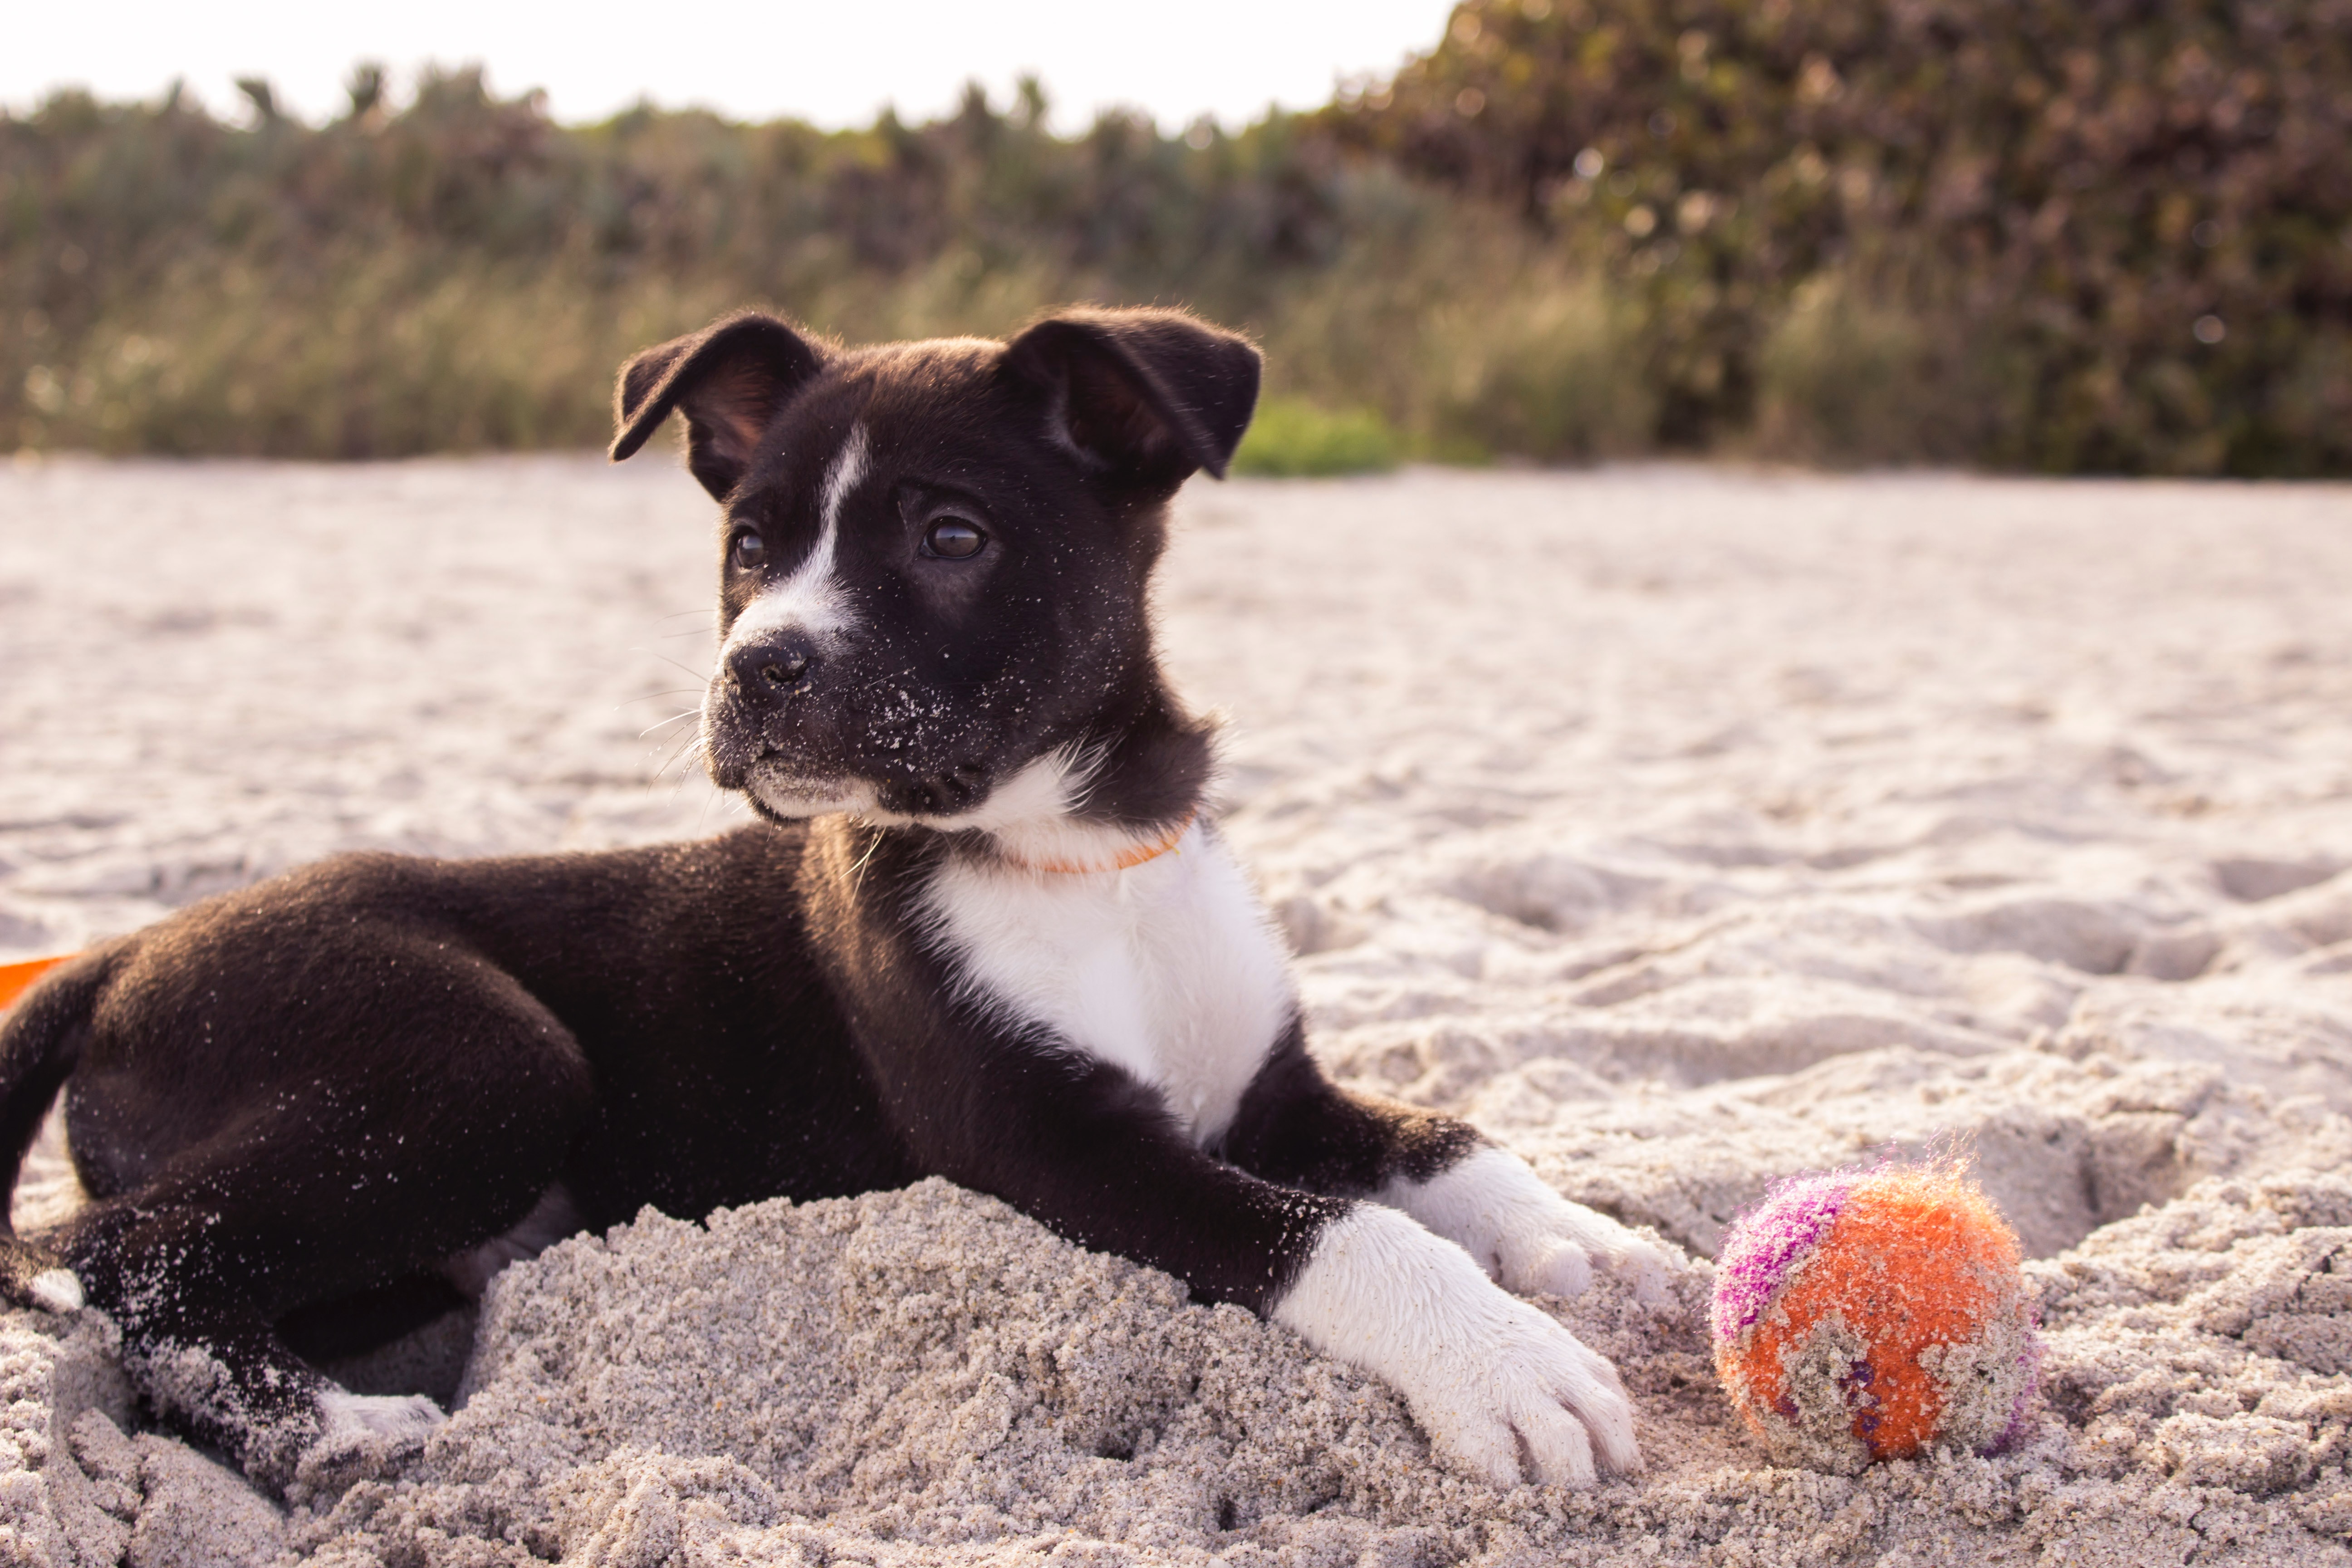 Puppy on beach with ball